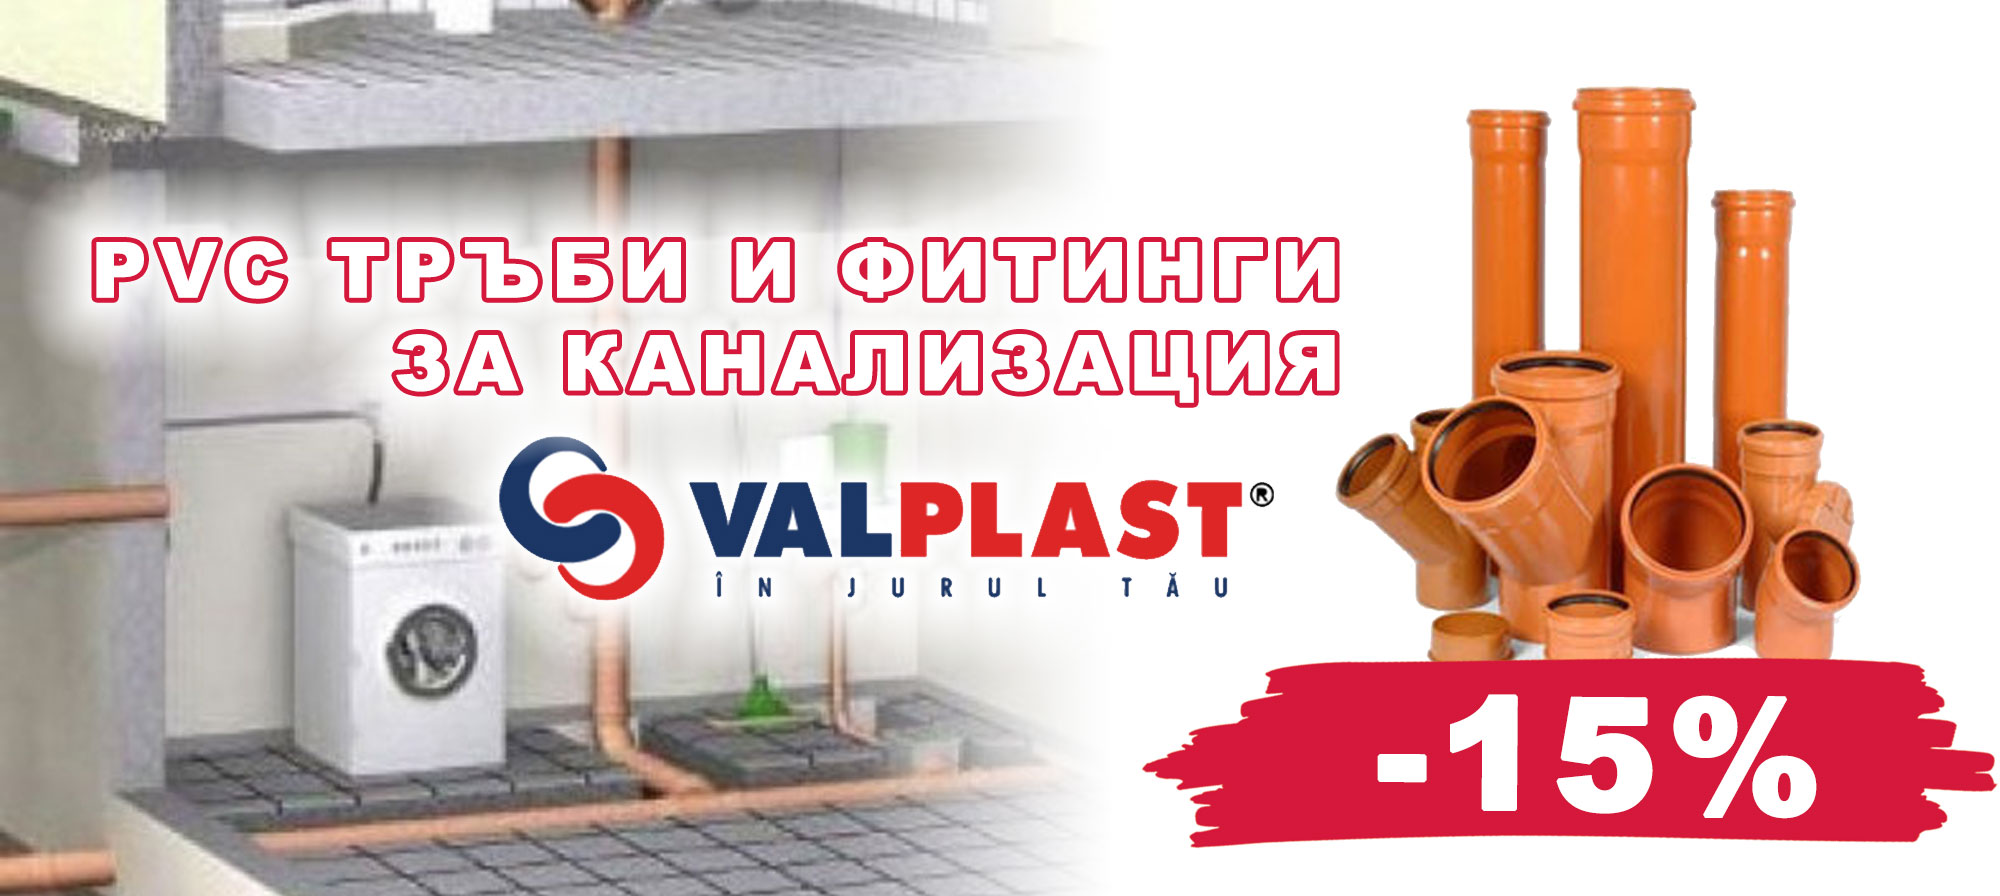 PVC pipes and fittings VALPLAST with a 15% discount